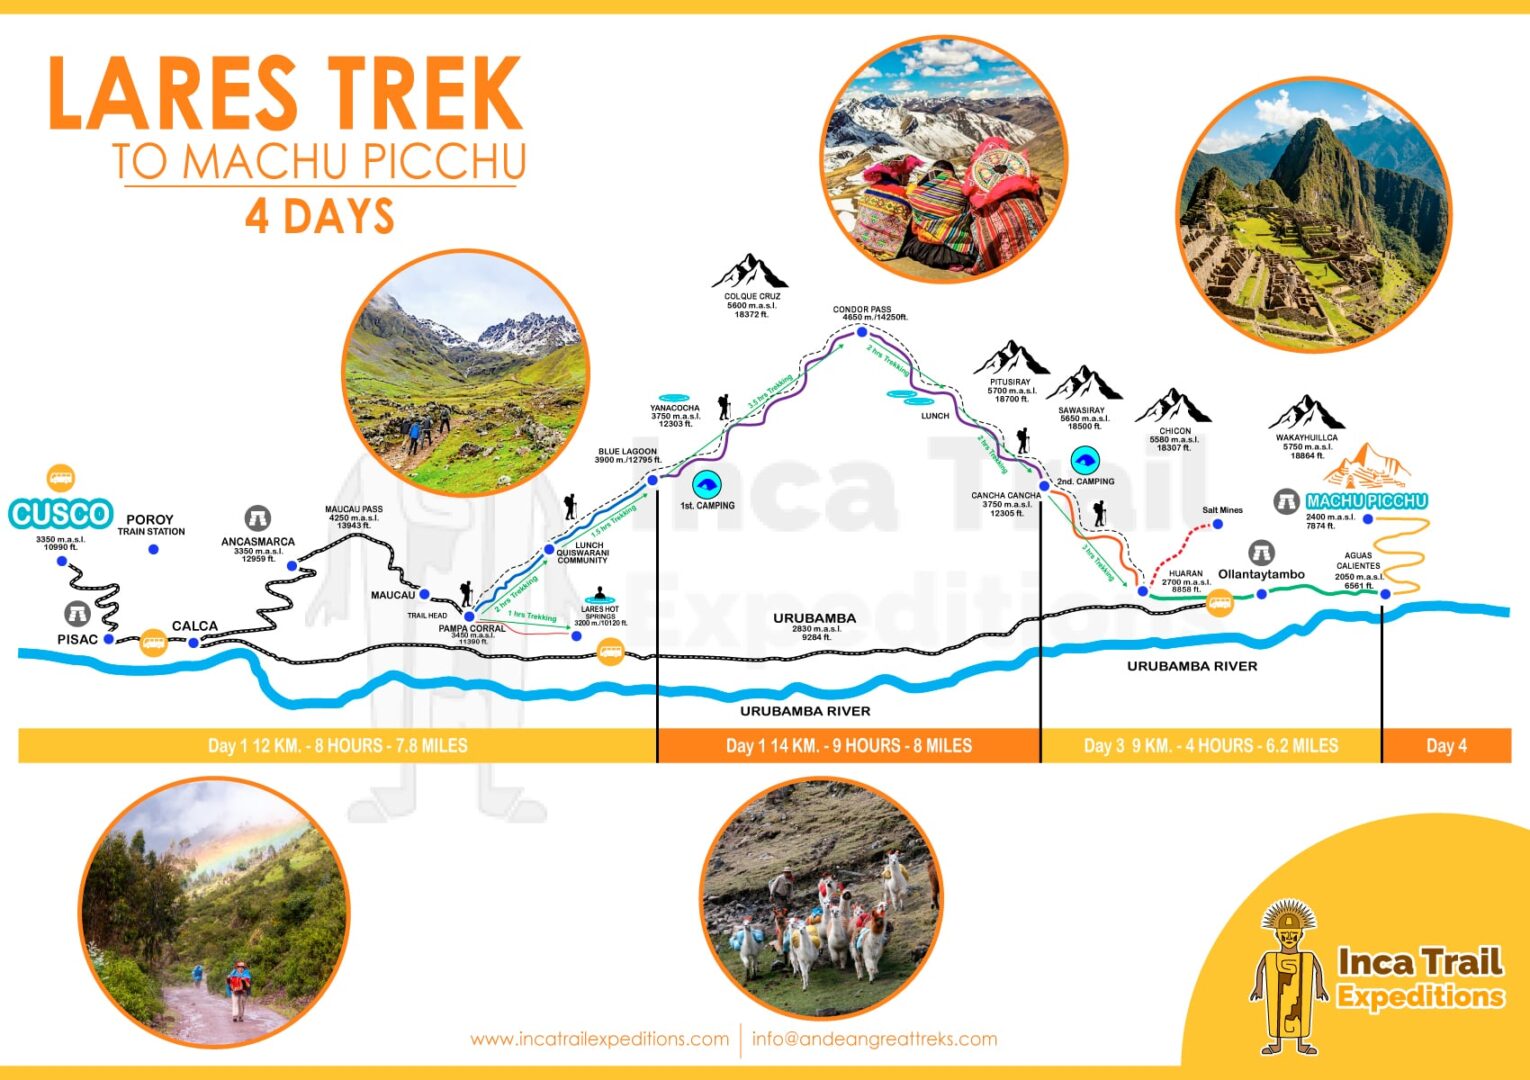 LARES-TREK-4-DAYS-BY-INCA-TRAIL-EXPEDITIONS